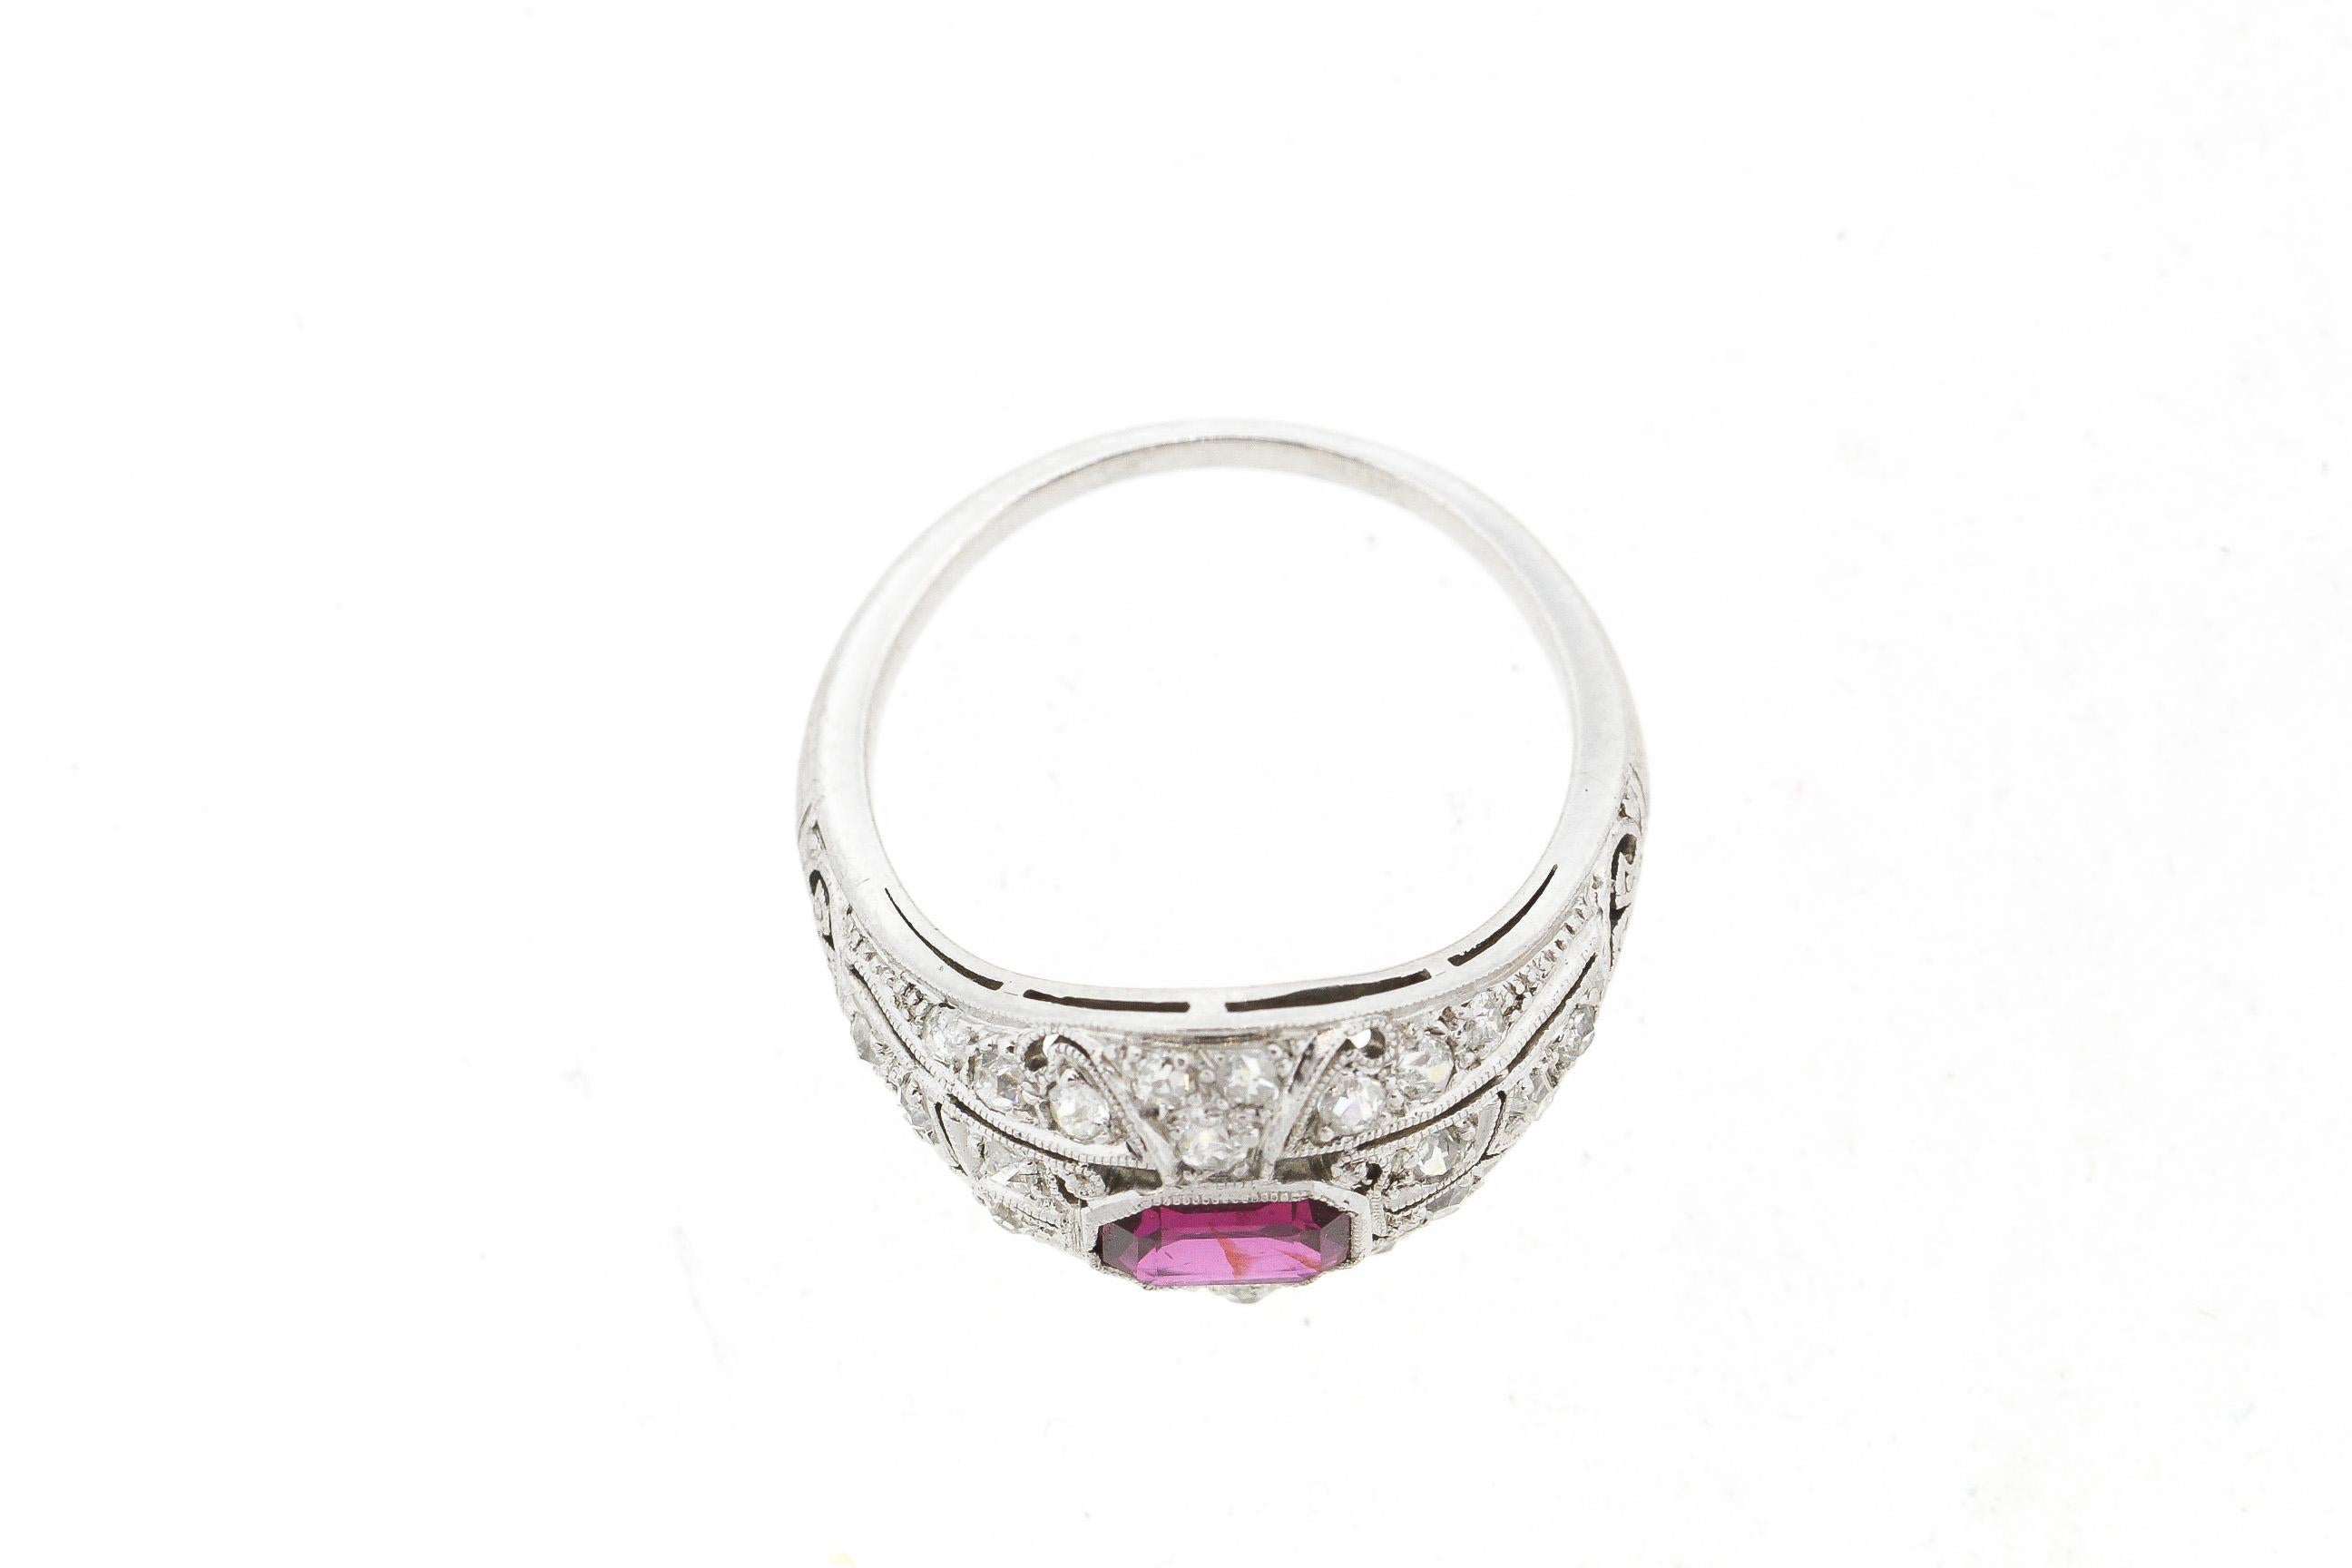 An antique Art Deco platinum diamond and rectangular shape ruby ring. The ruby is set in a beautiful original filigree platinum mounting set with numerous old single cut diamonds. Delicate scrolls and leaf pierce work adorn the mounting. The ruby is